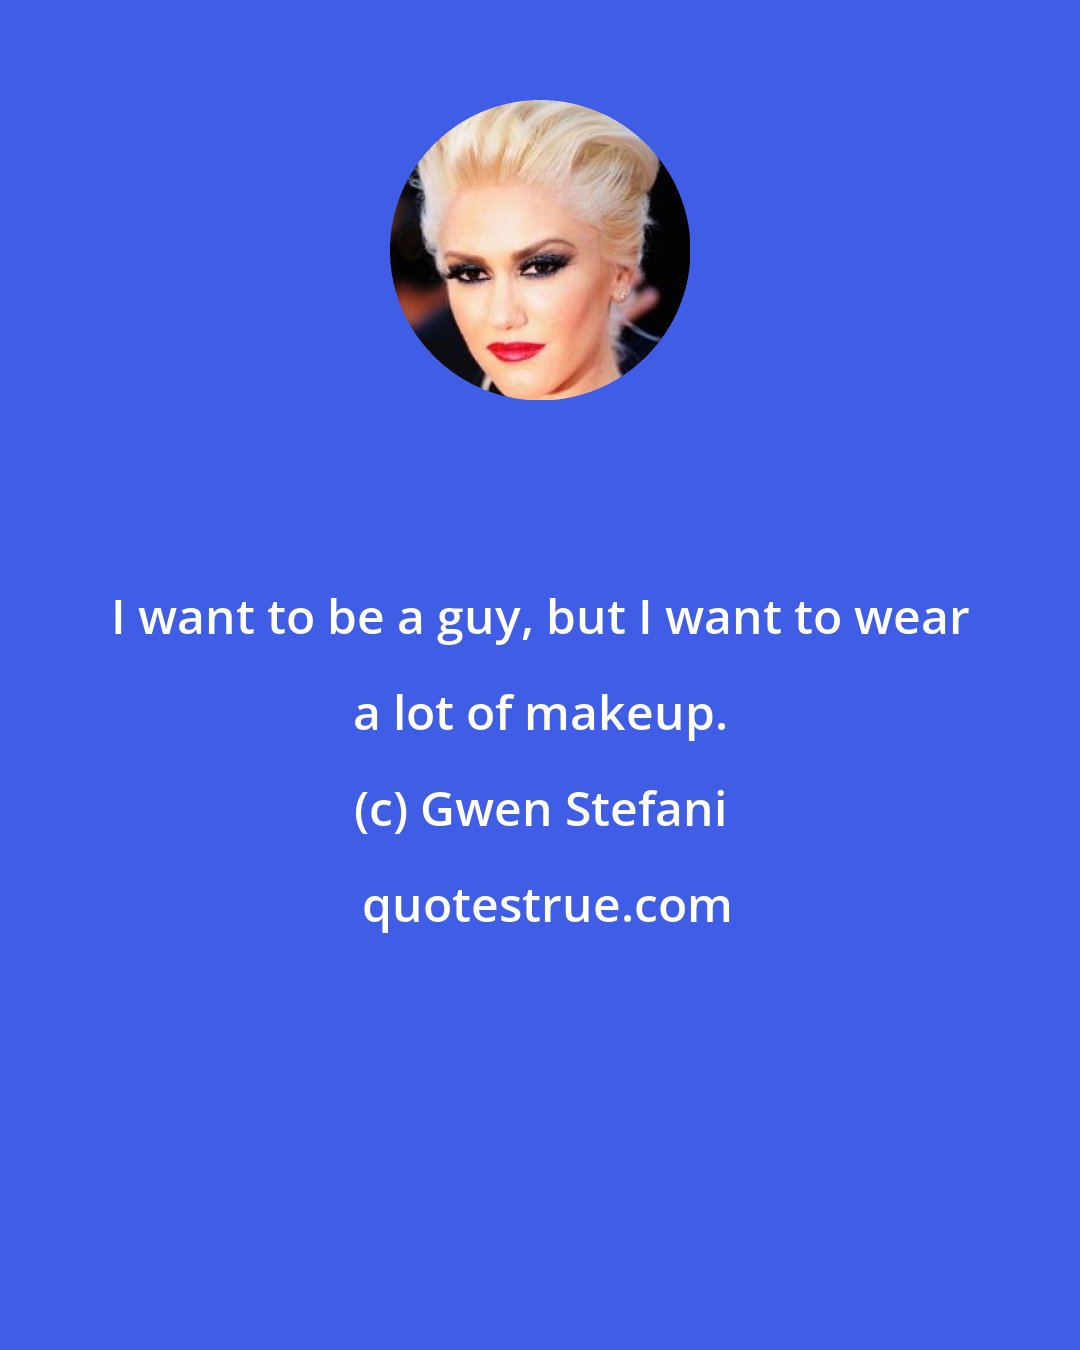 Gwen Stefani: I want to be a guy, but I want to wear a lot of makeup.